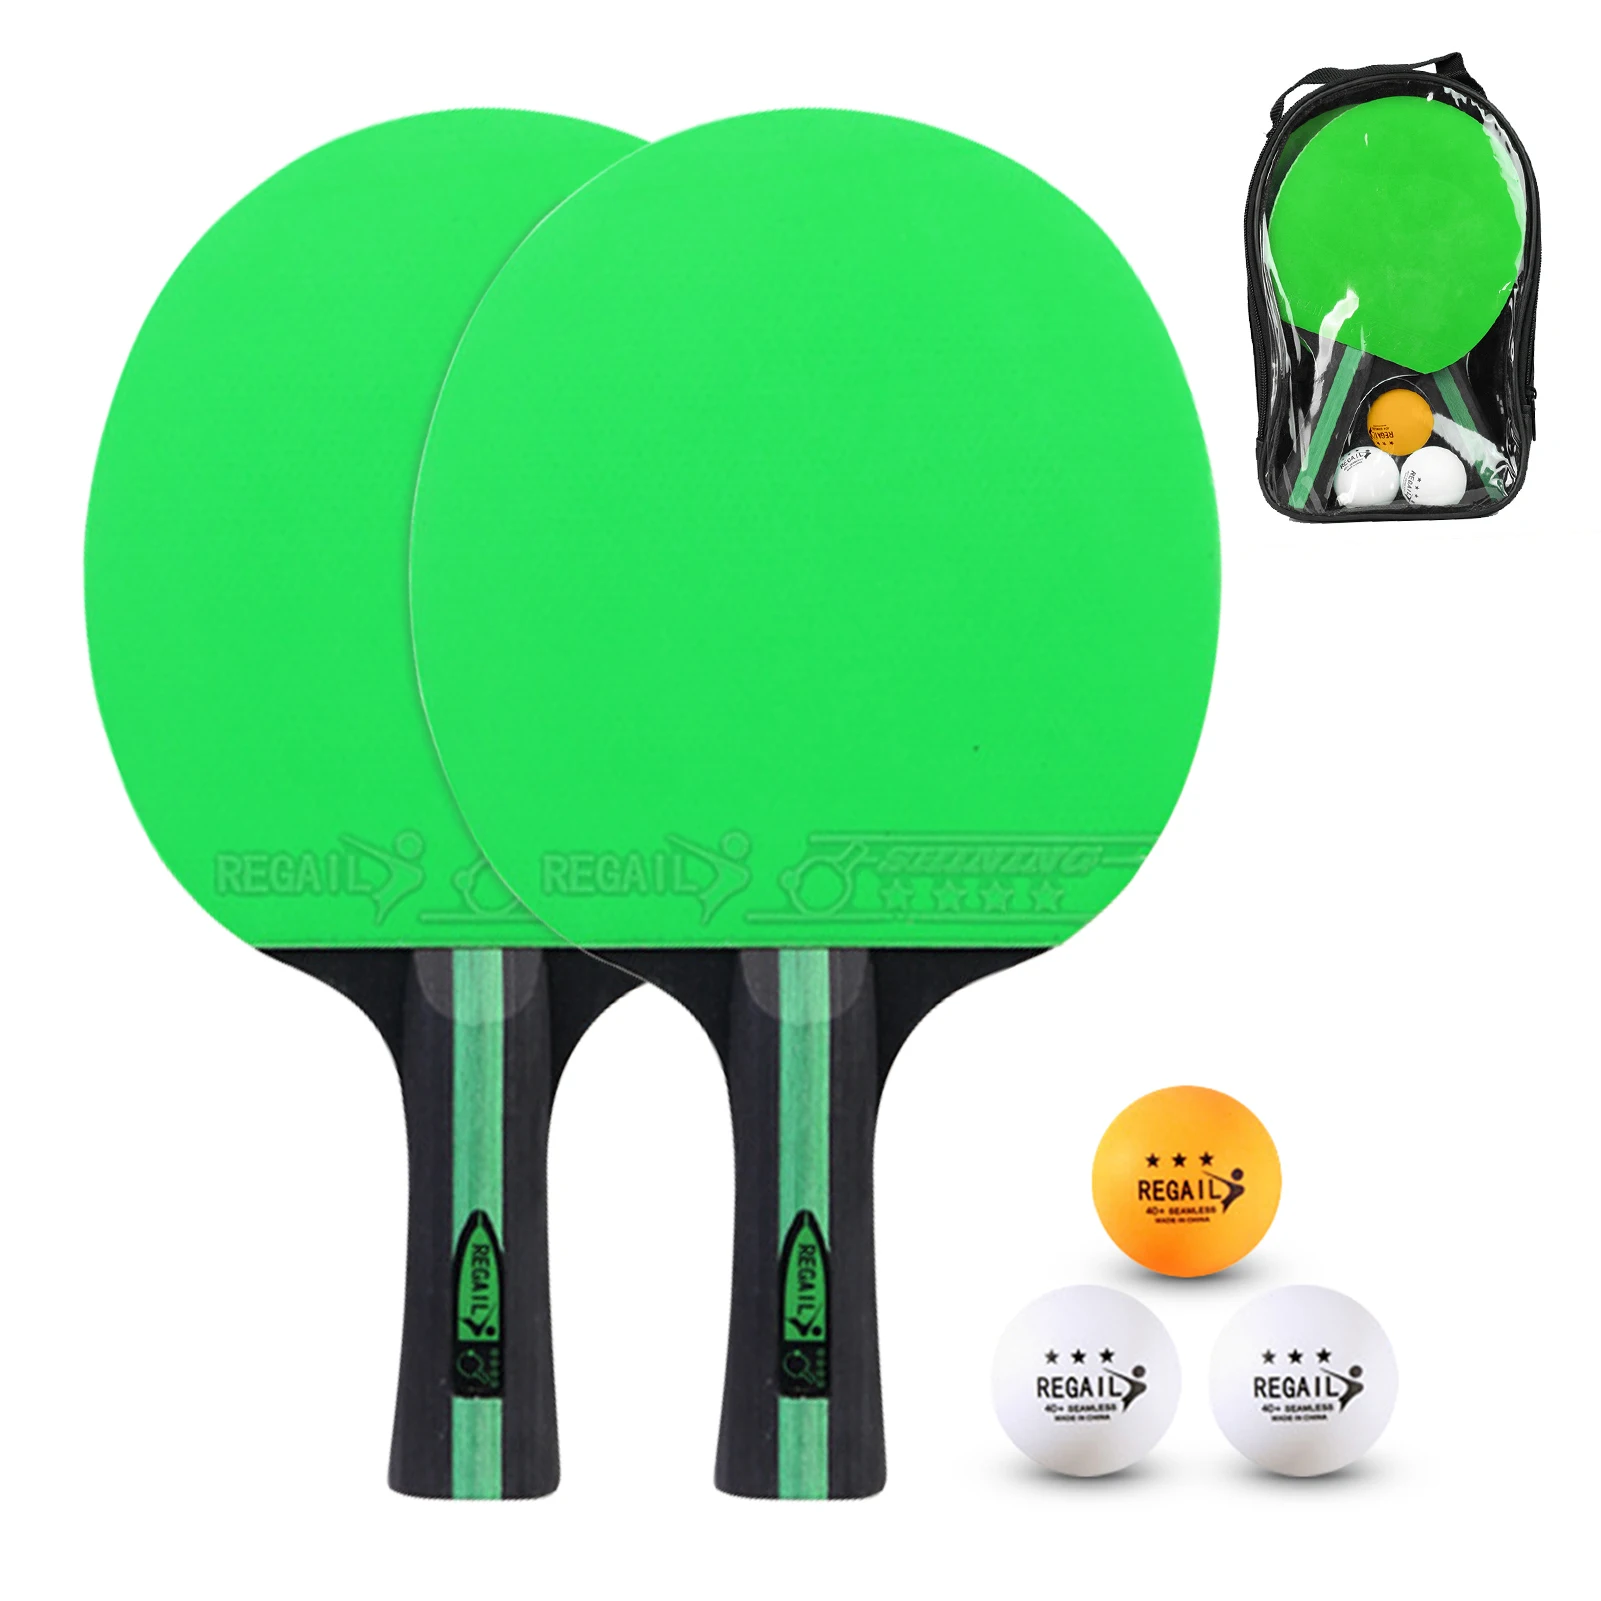 

Professional Ping Pong Racket Carbon Table Tennis Racket Bat Paddle Set Pimples in Rubber with Carry Bag for Beginners Boys Girl